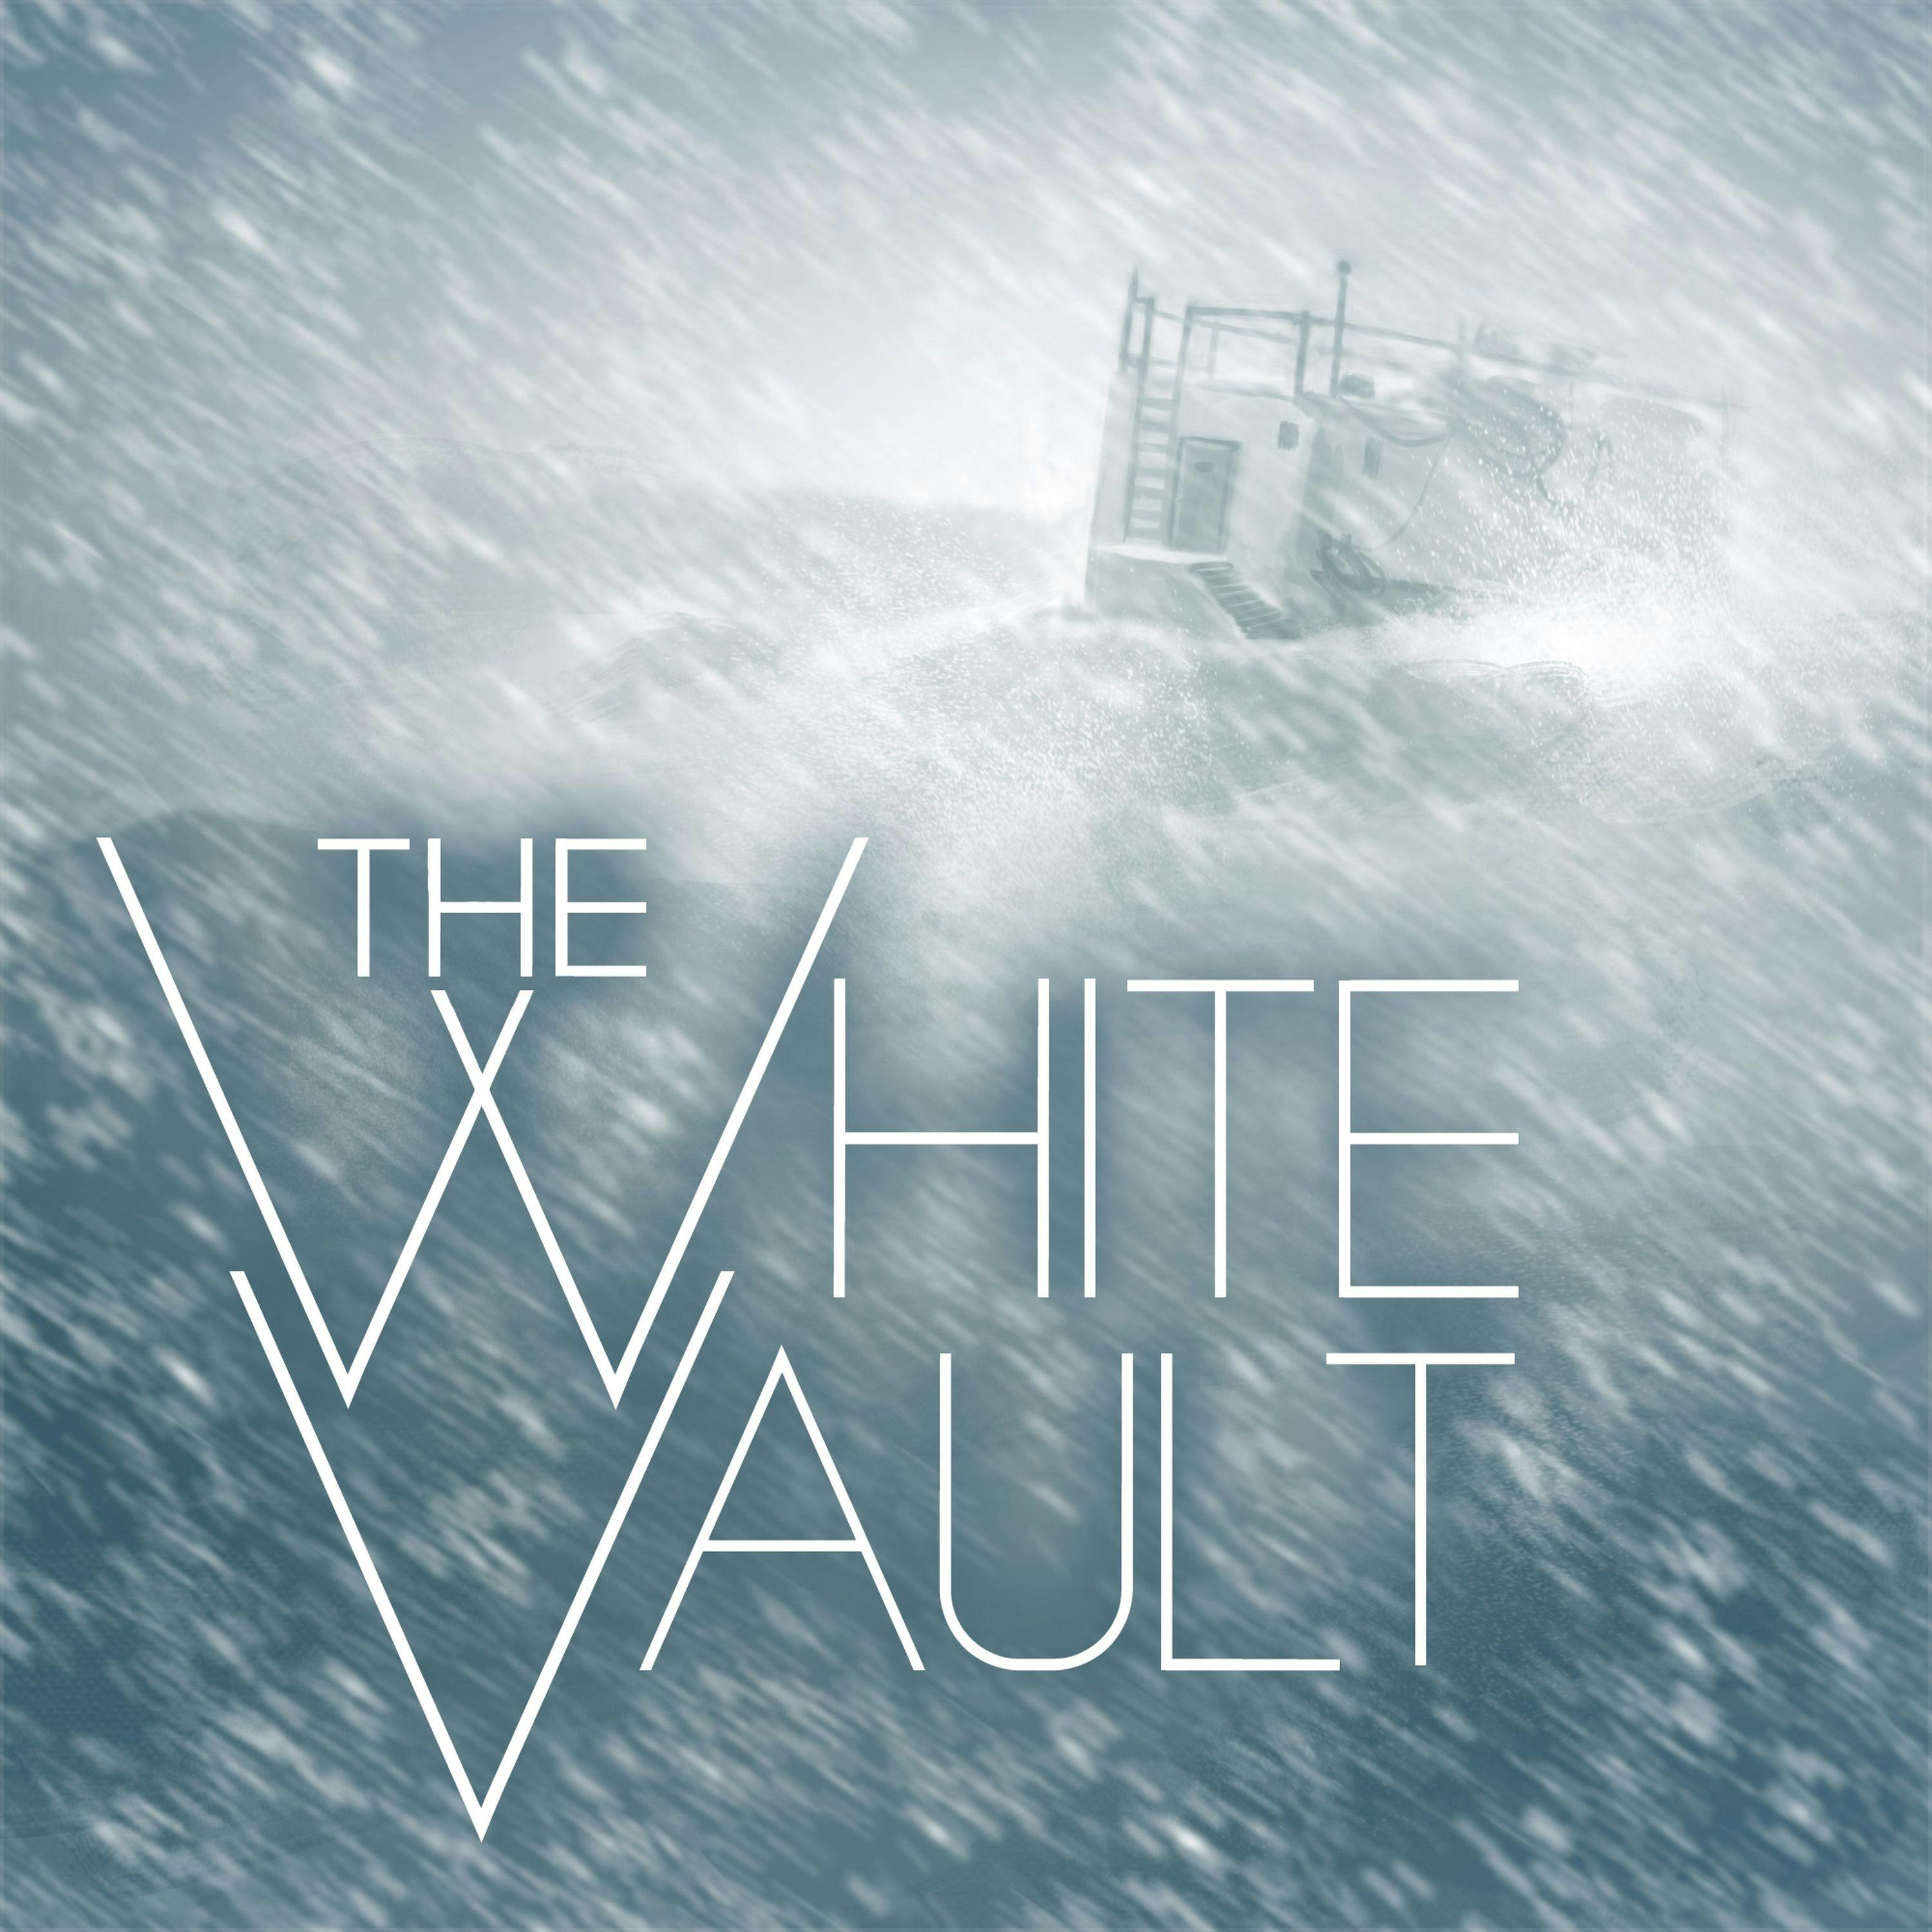 The White Vault: Delivery